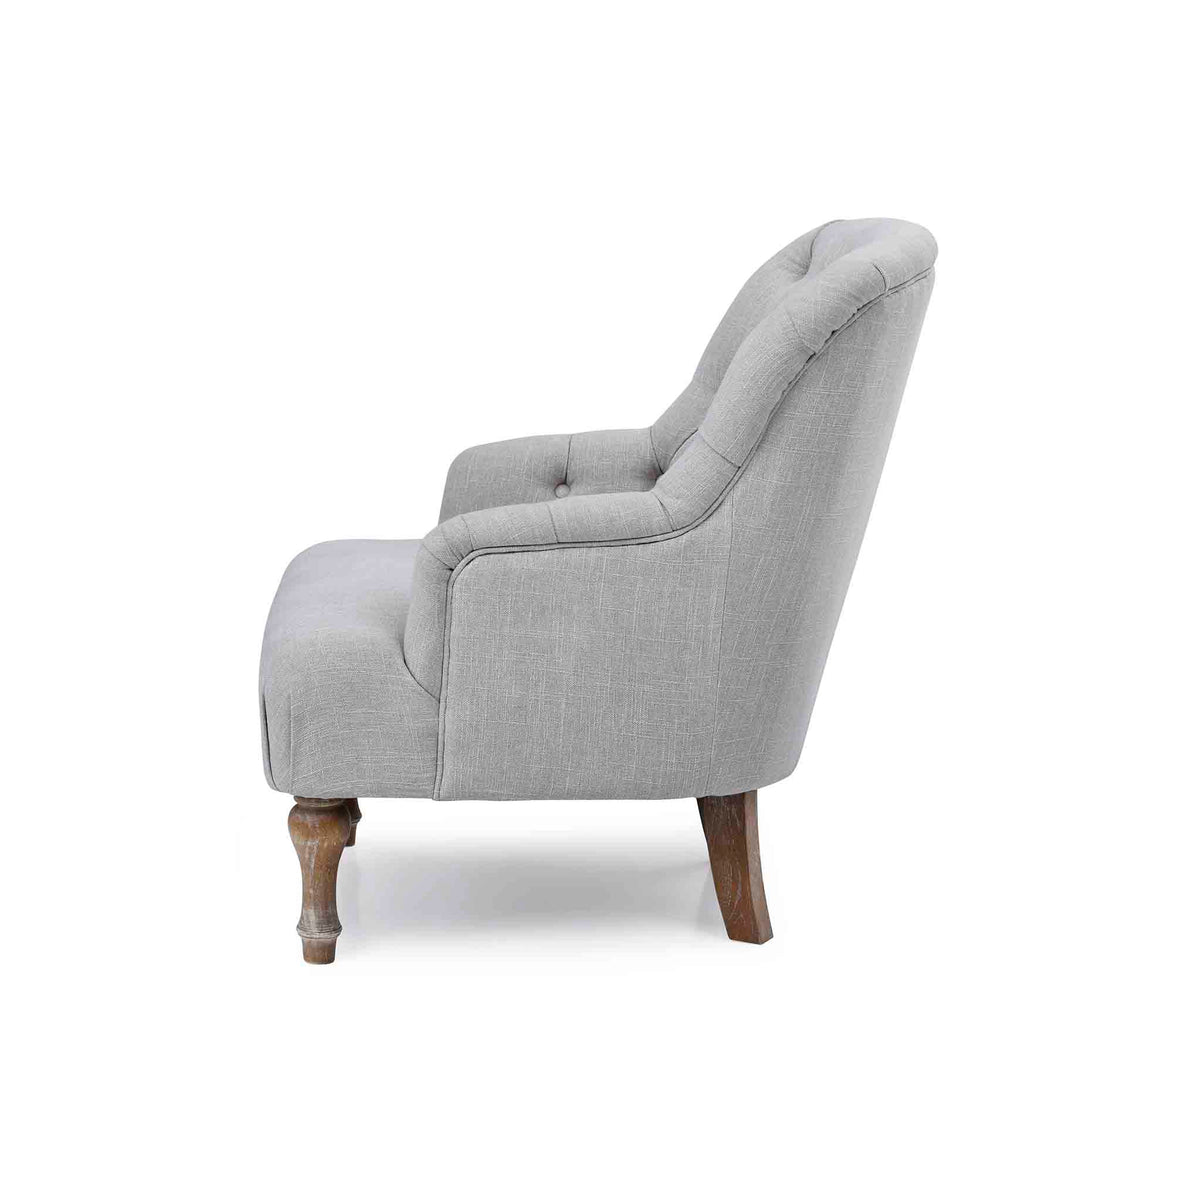 side view of the Grey Linen Fabric Bianca Armchair